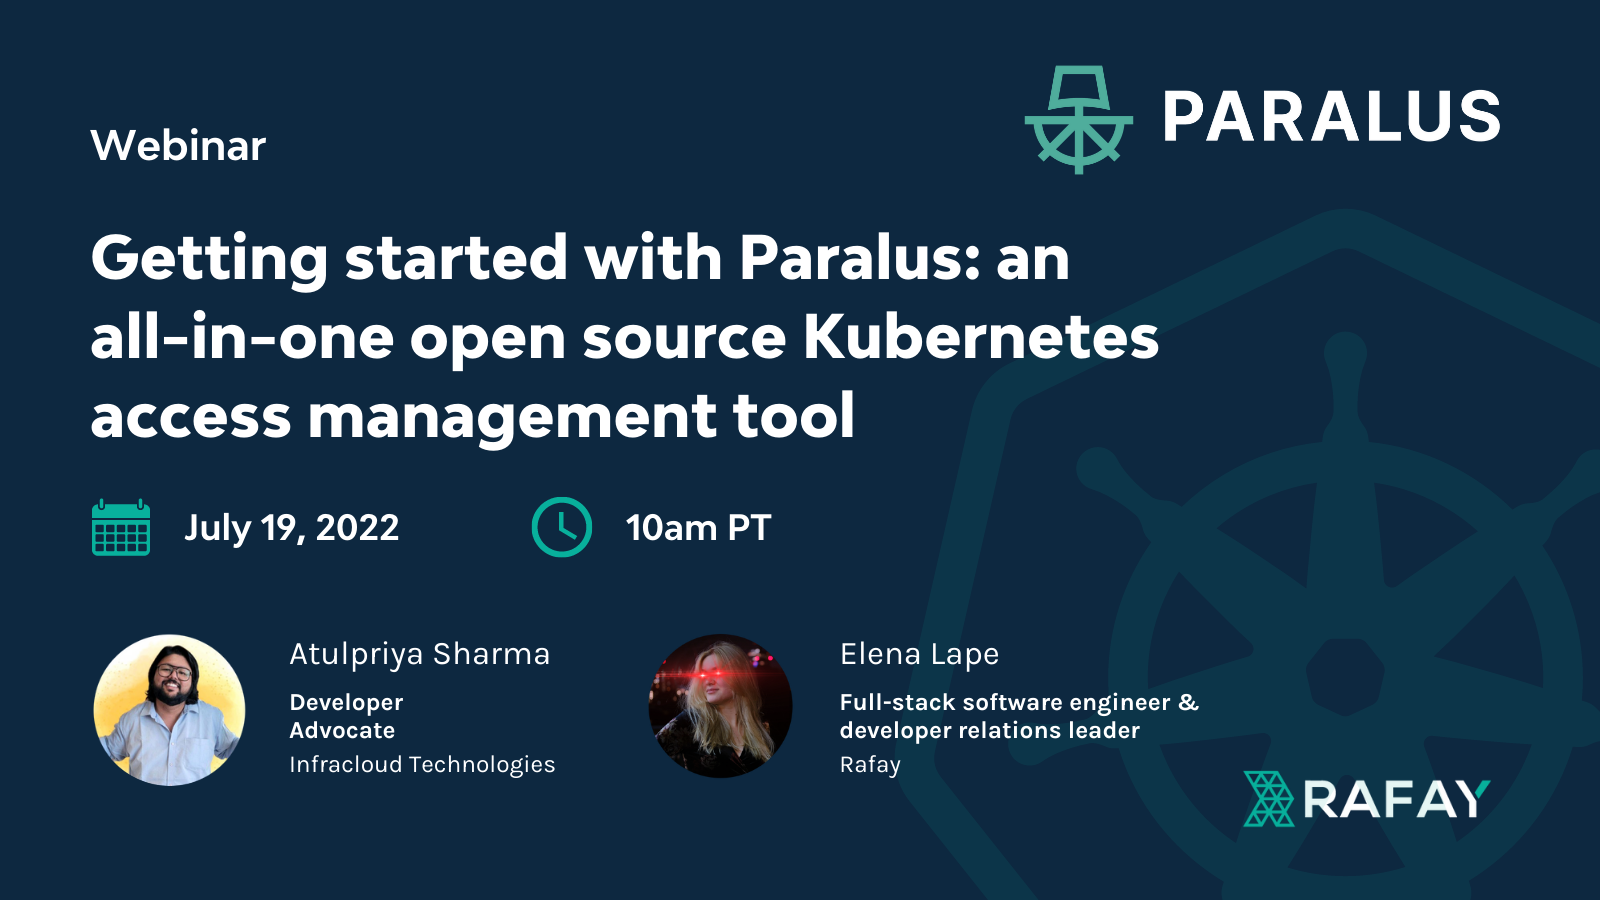 image for Getting started with Paralus: an all-in-one open source Kubernetes access management tool